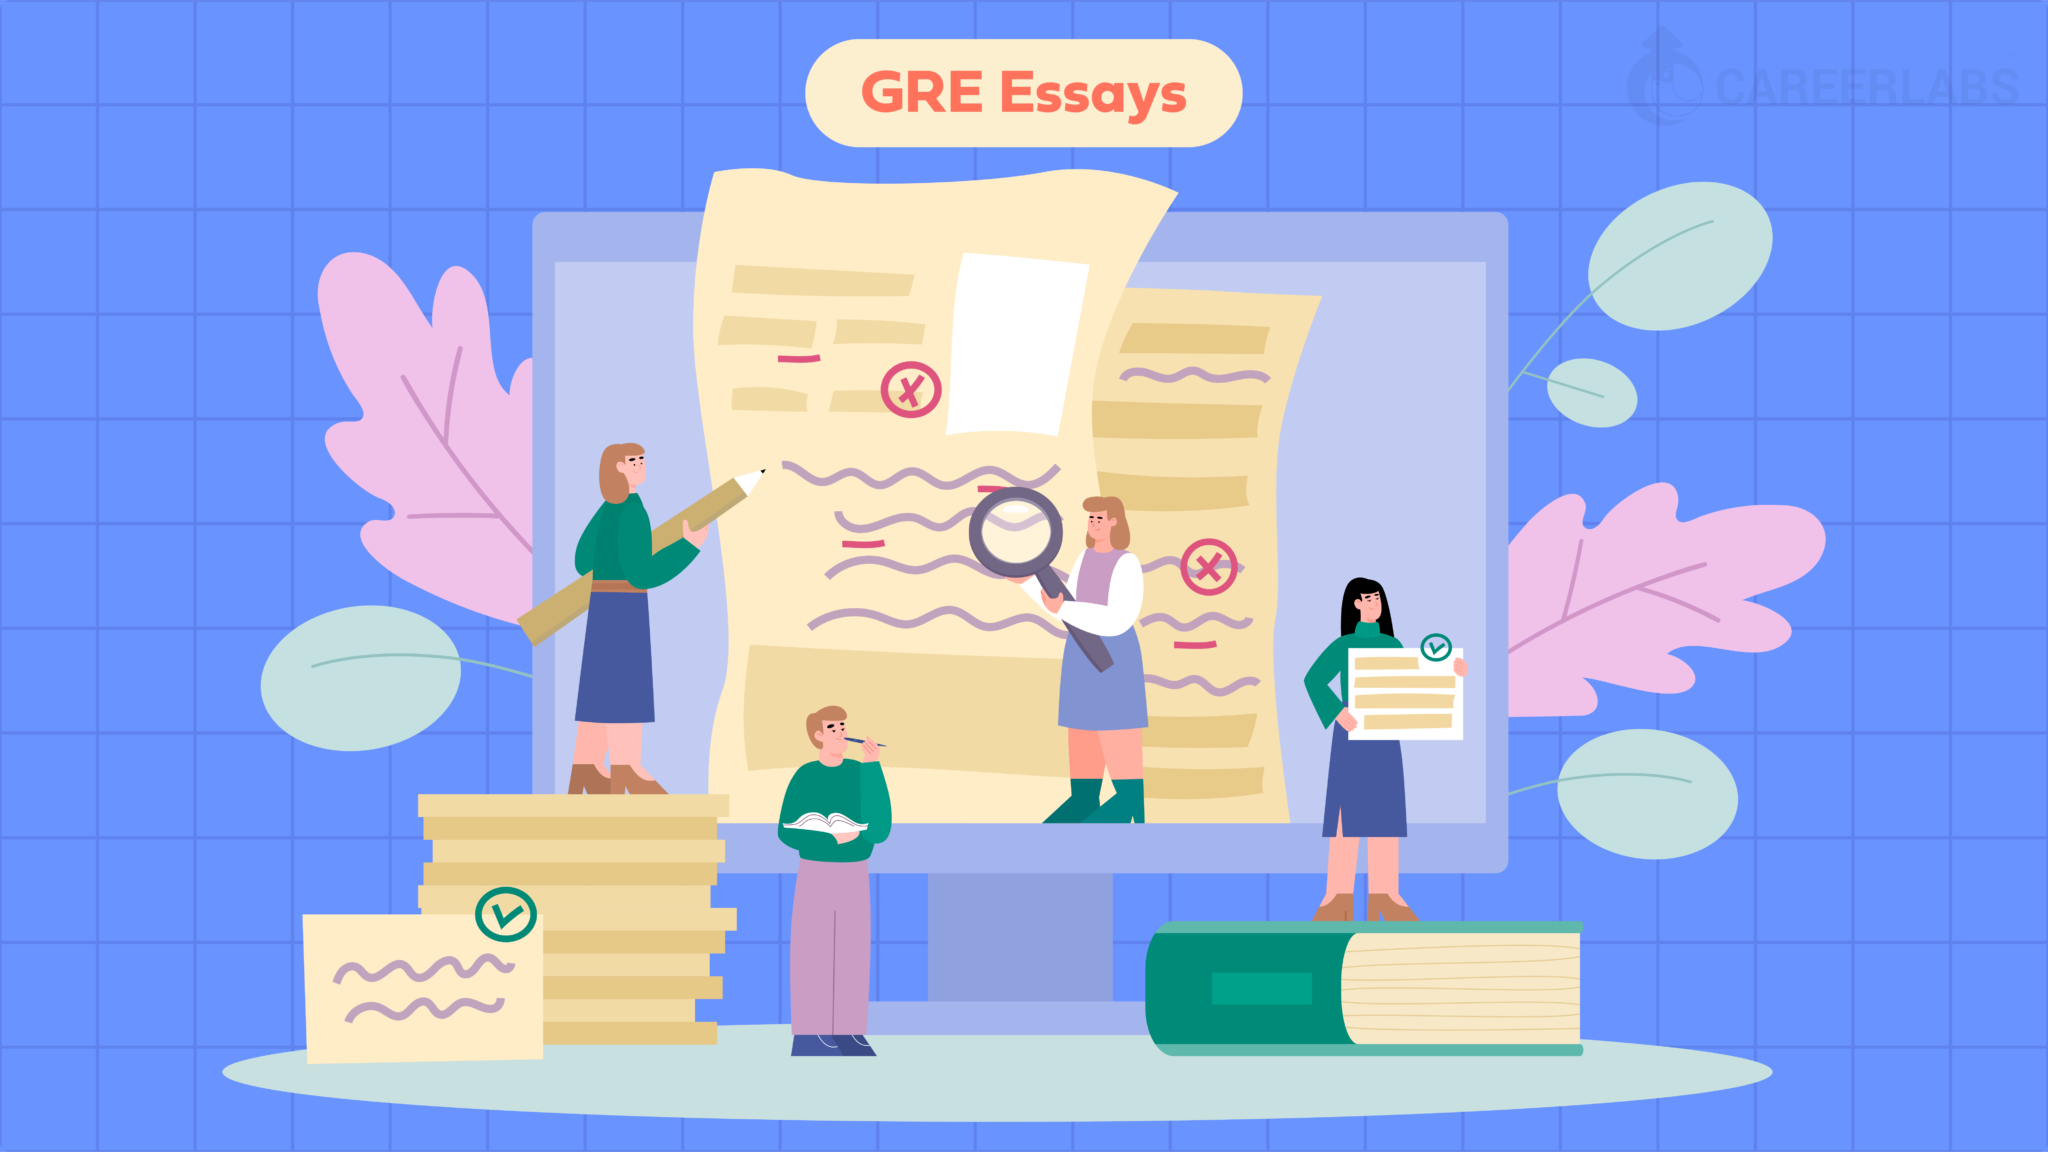 gre analytical writing examples